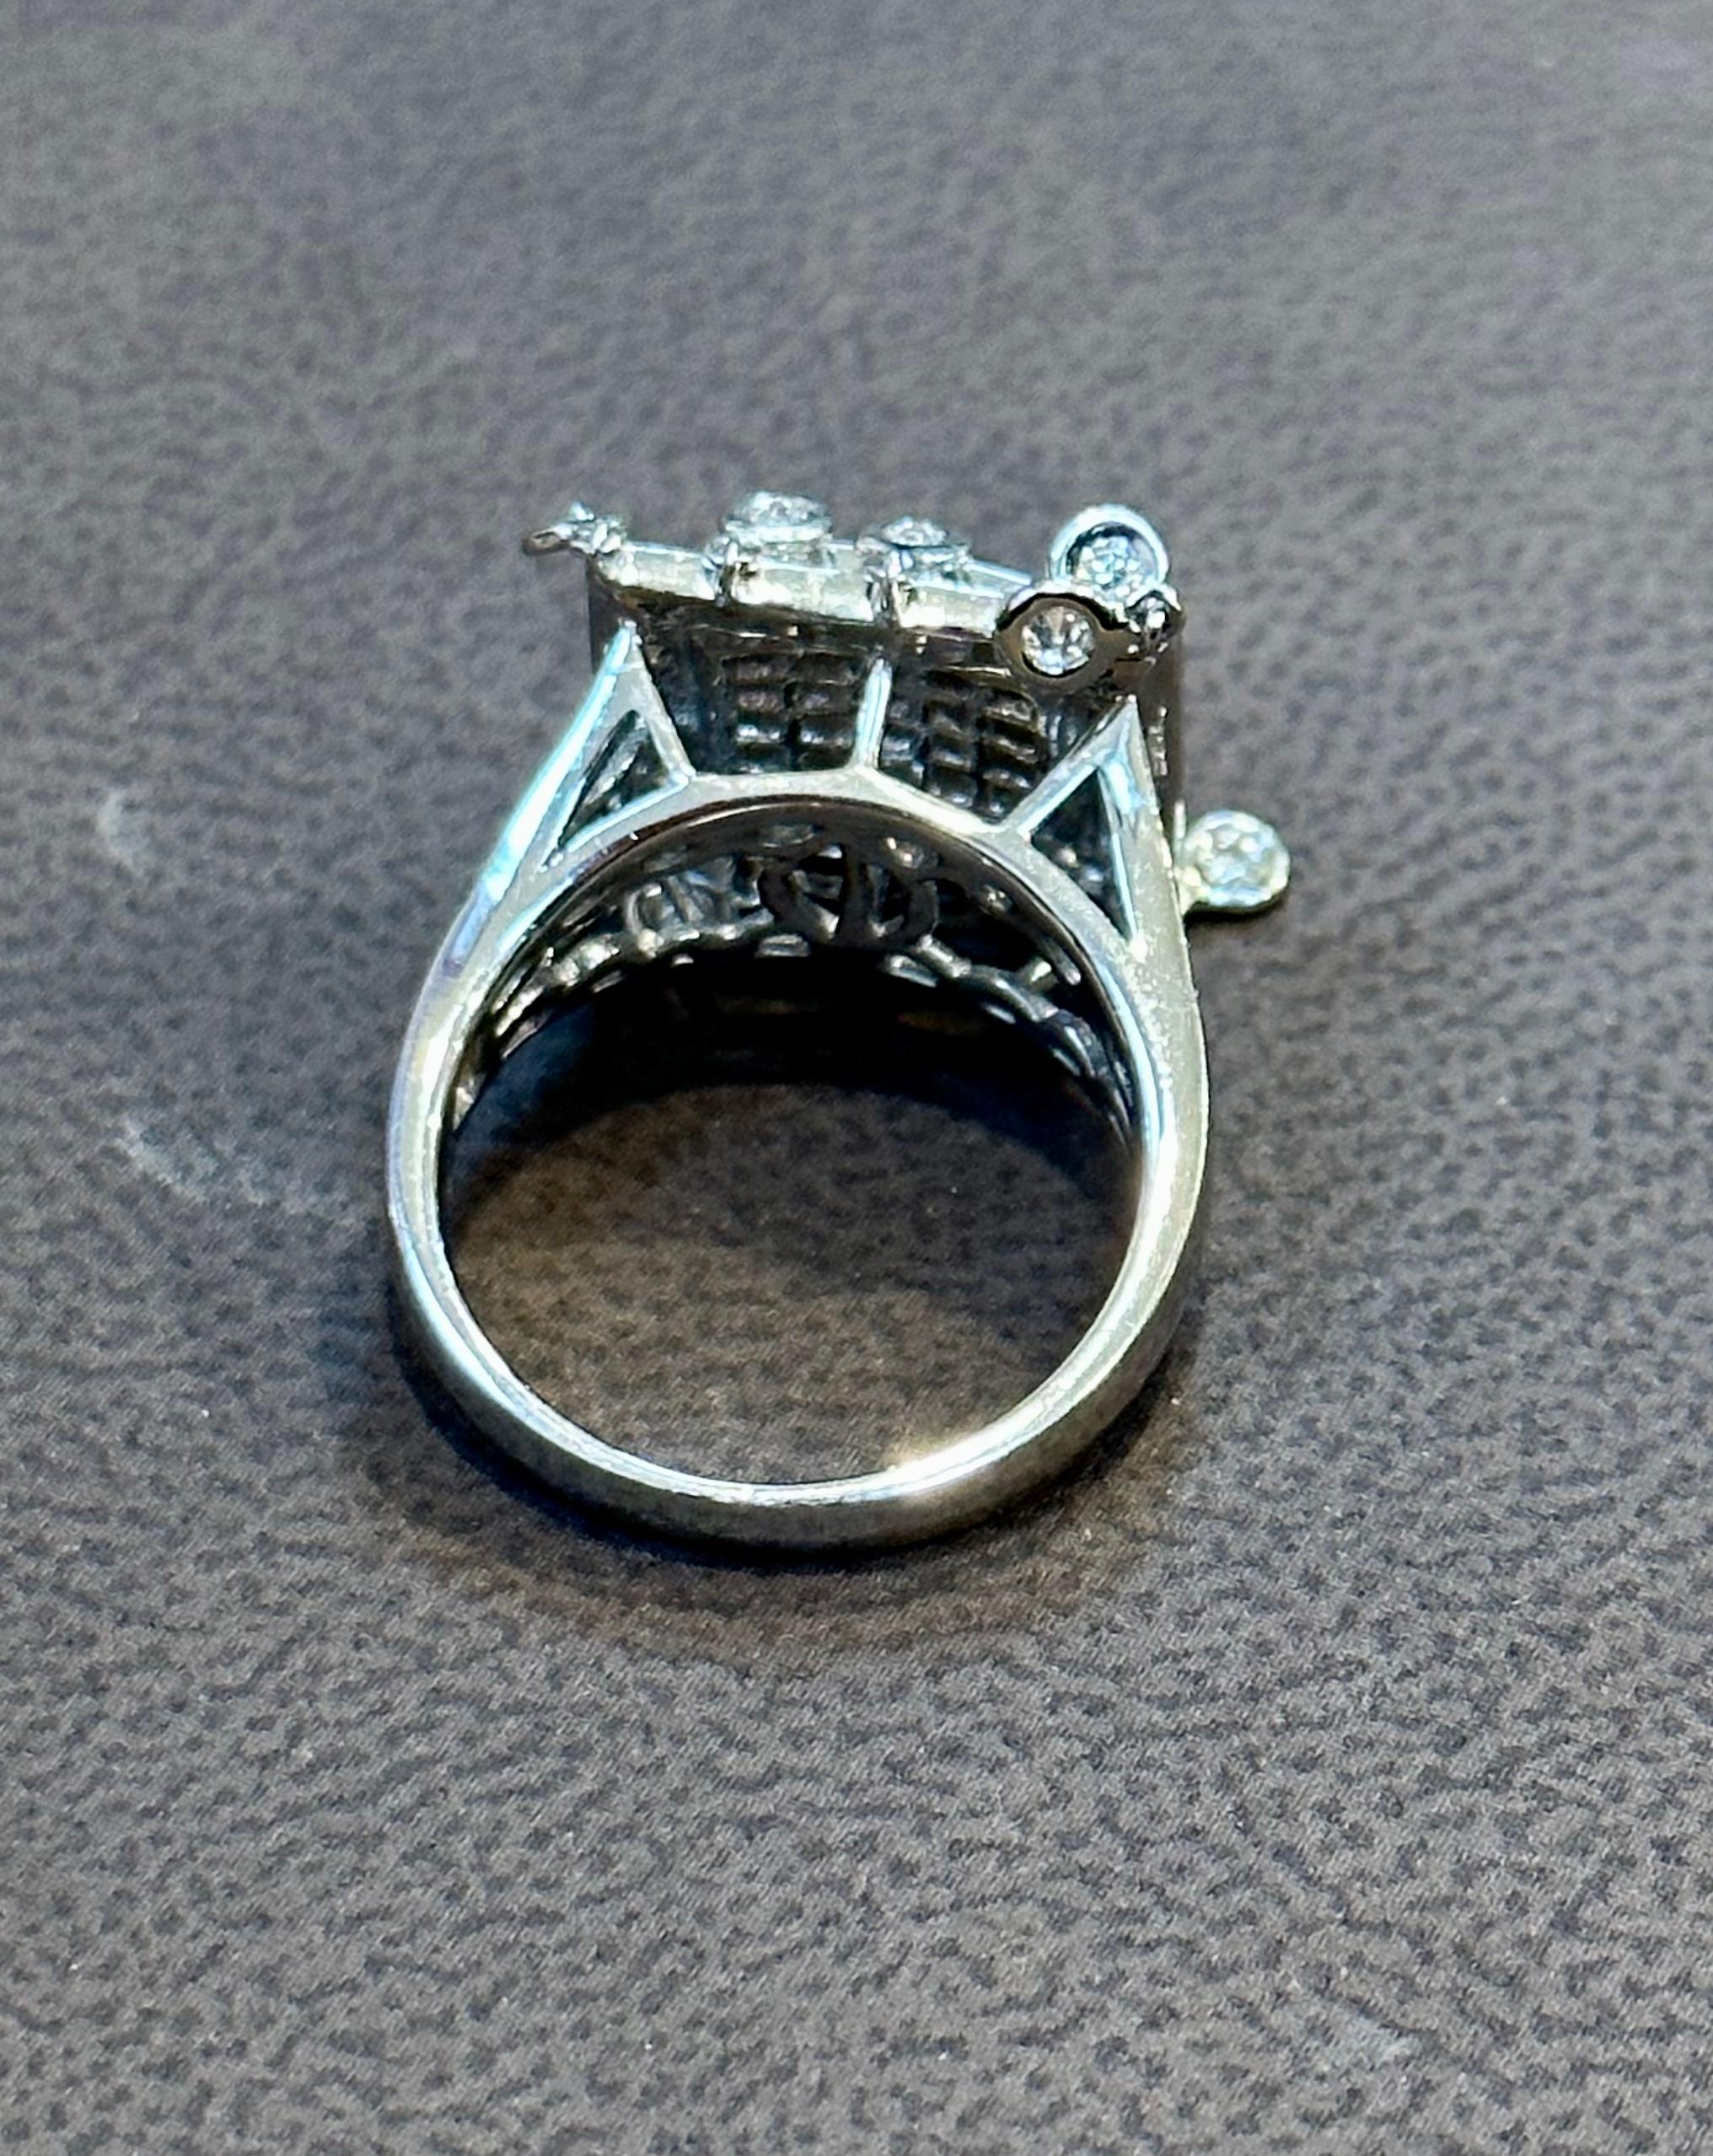 1.9 ring size